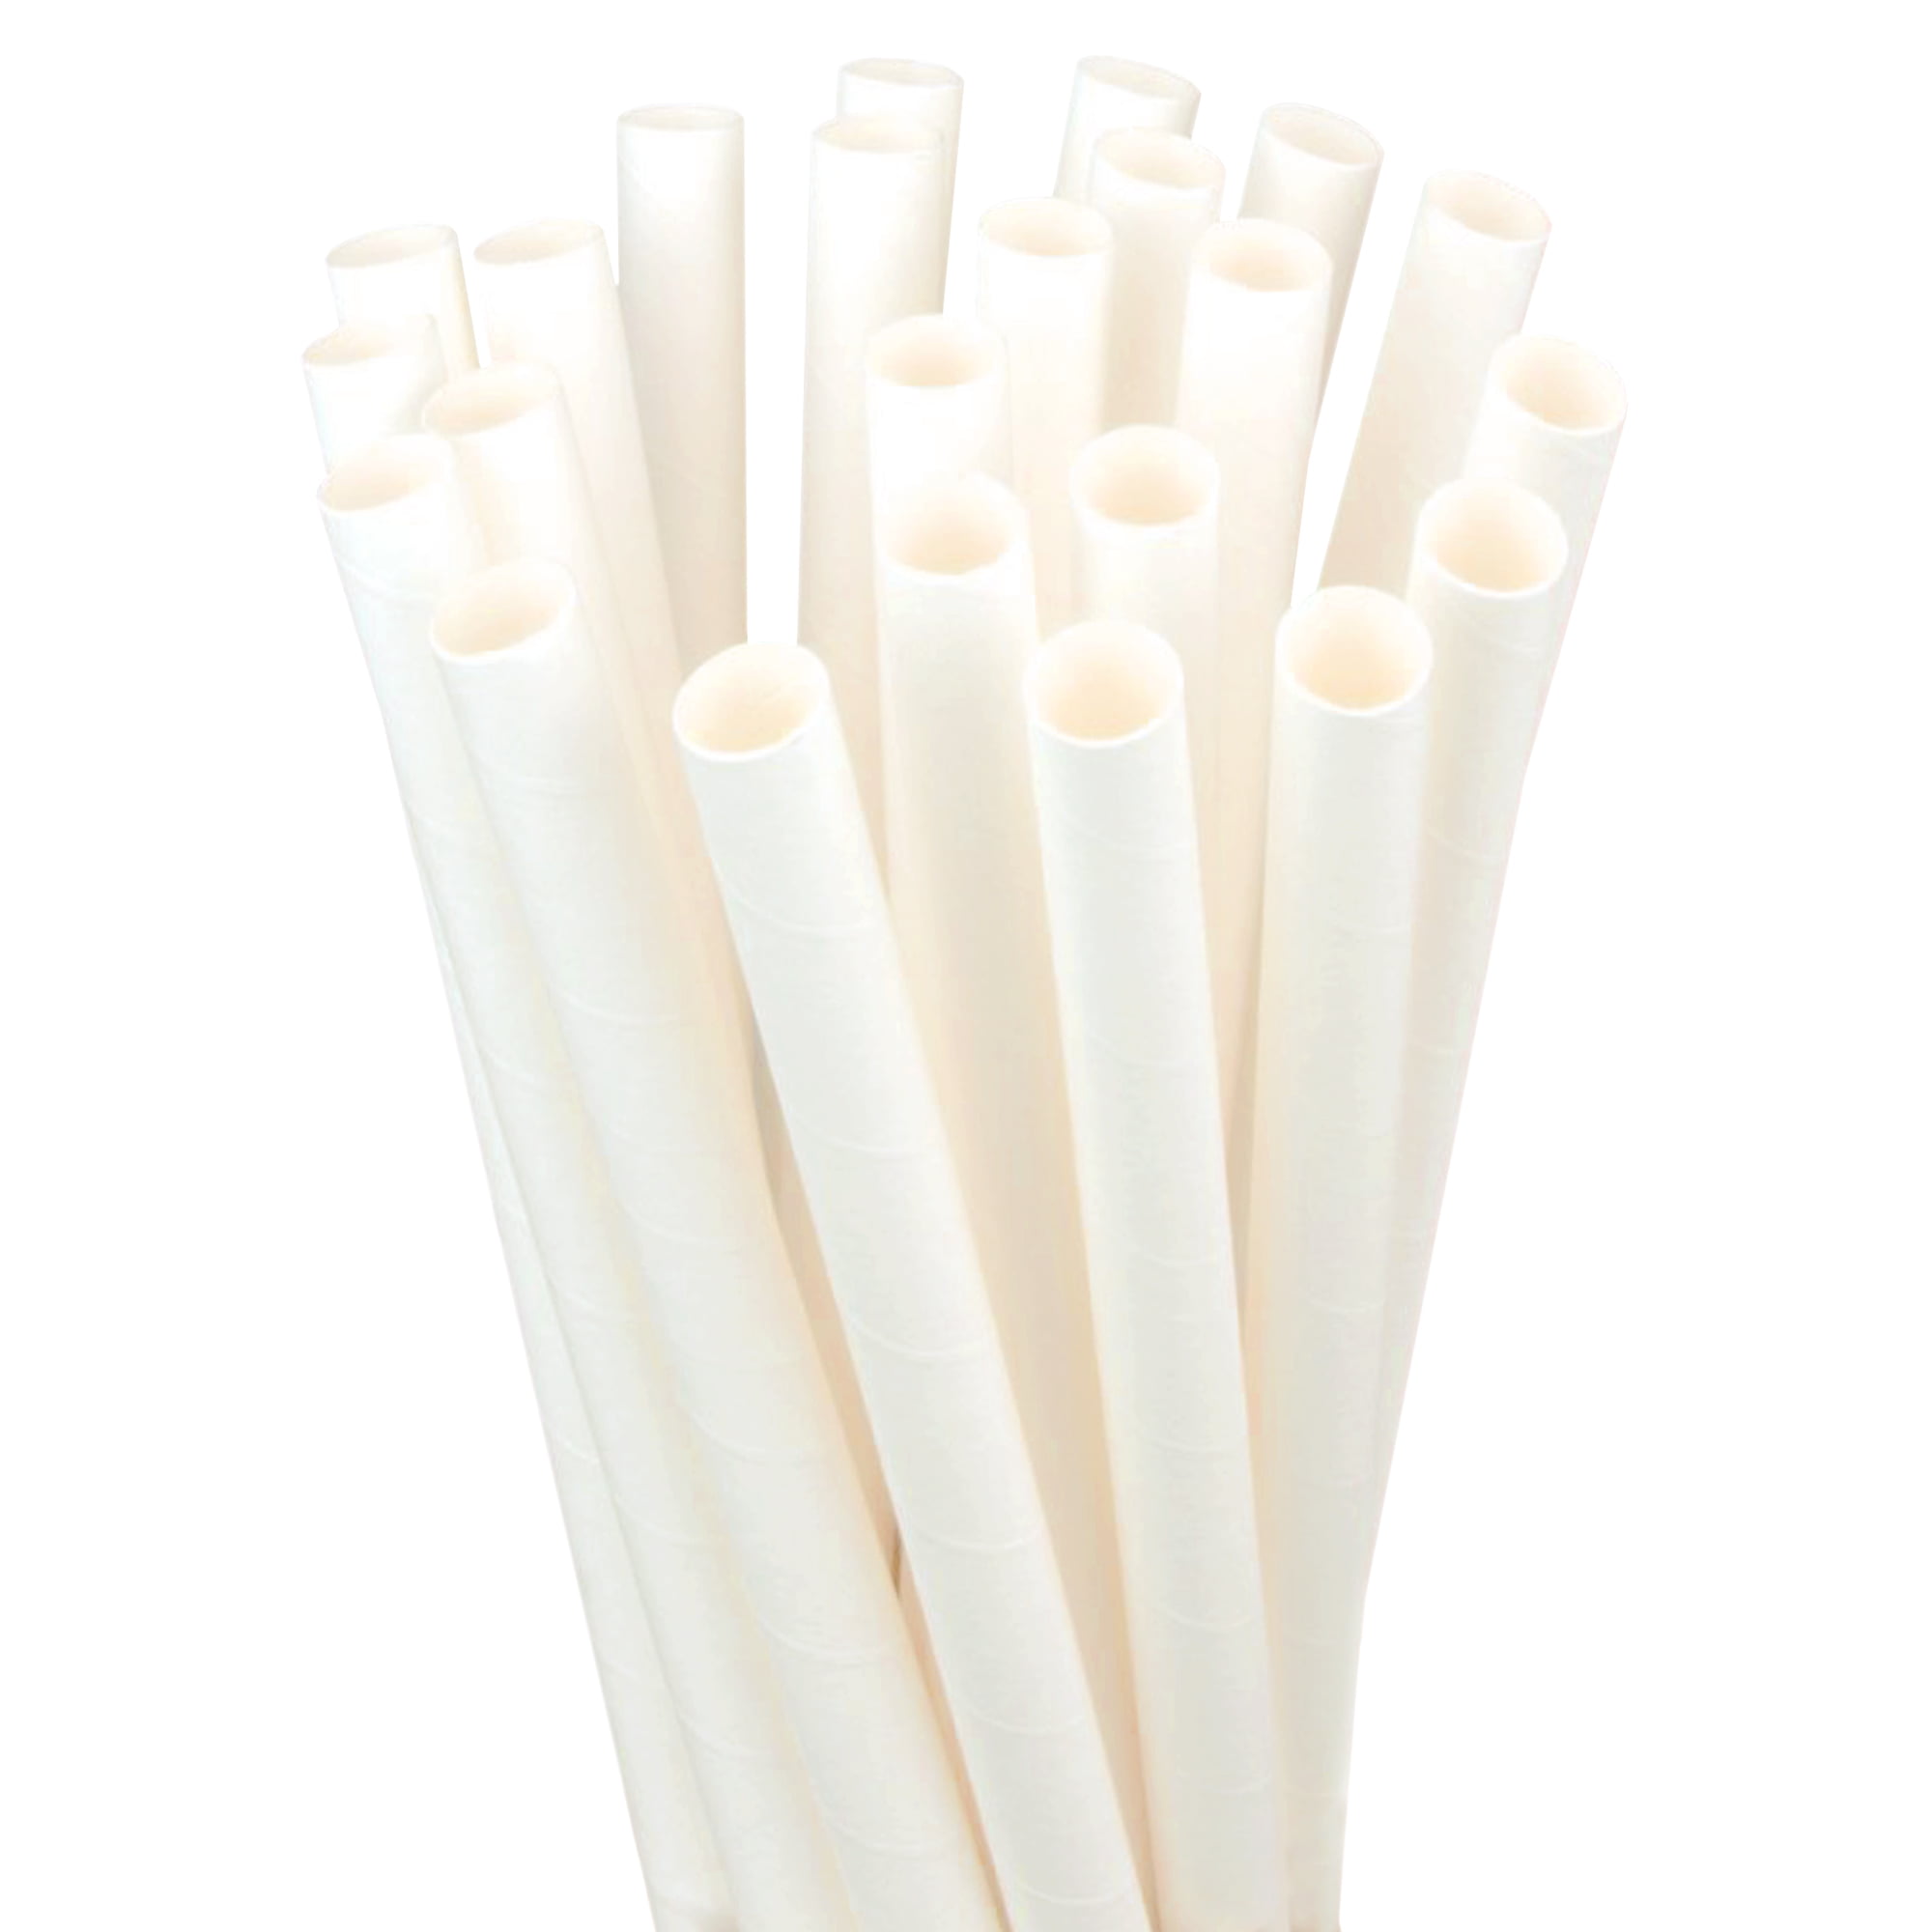 Milk Juices Home Parties Etc 20 cm Long with 6MM Bore Travel Smoothies 250 Pack Paper Straws for Coffee DIY Projects Eco-Friendly Biodegradable Straws Office 